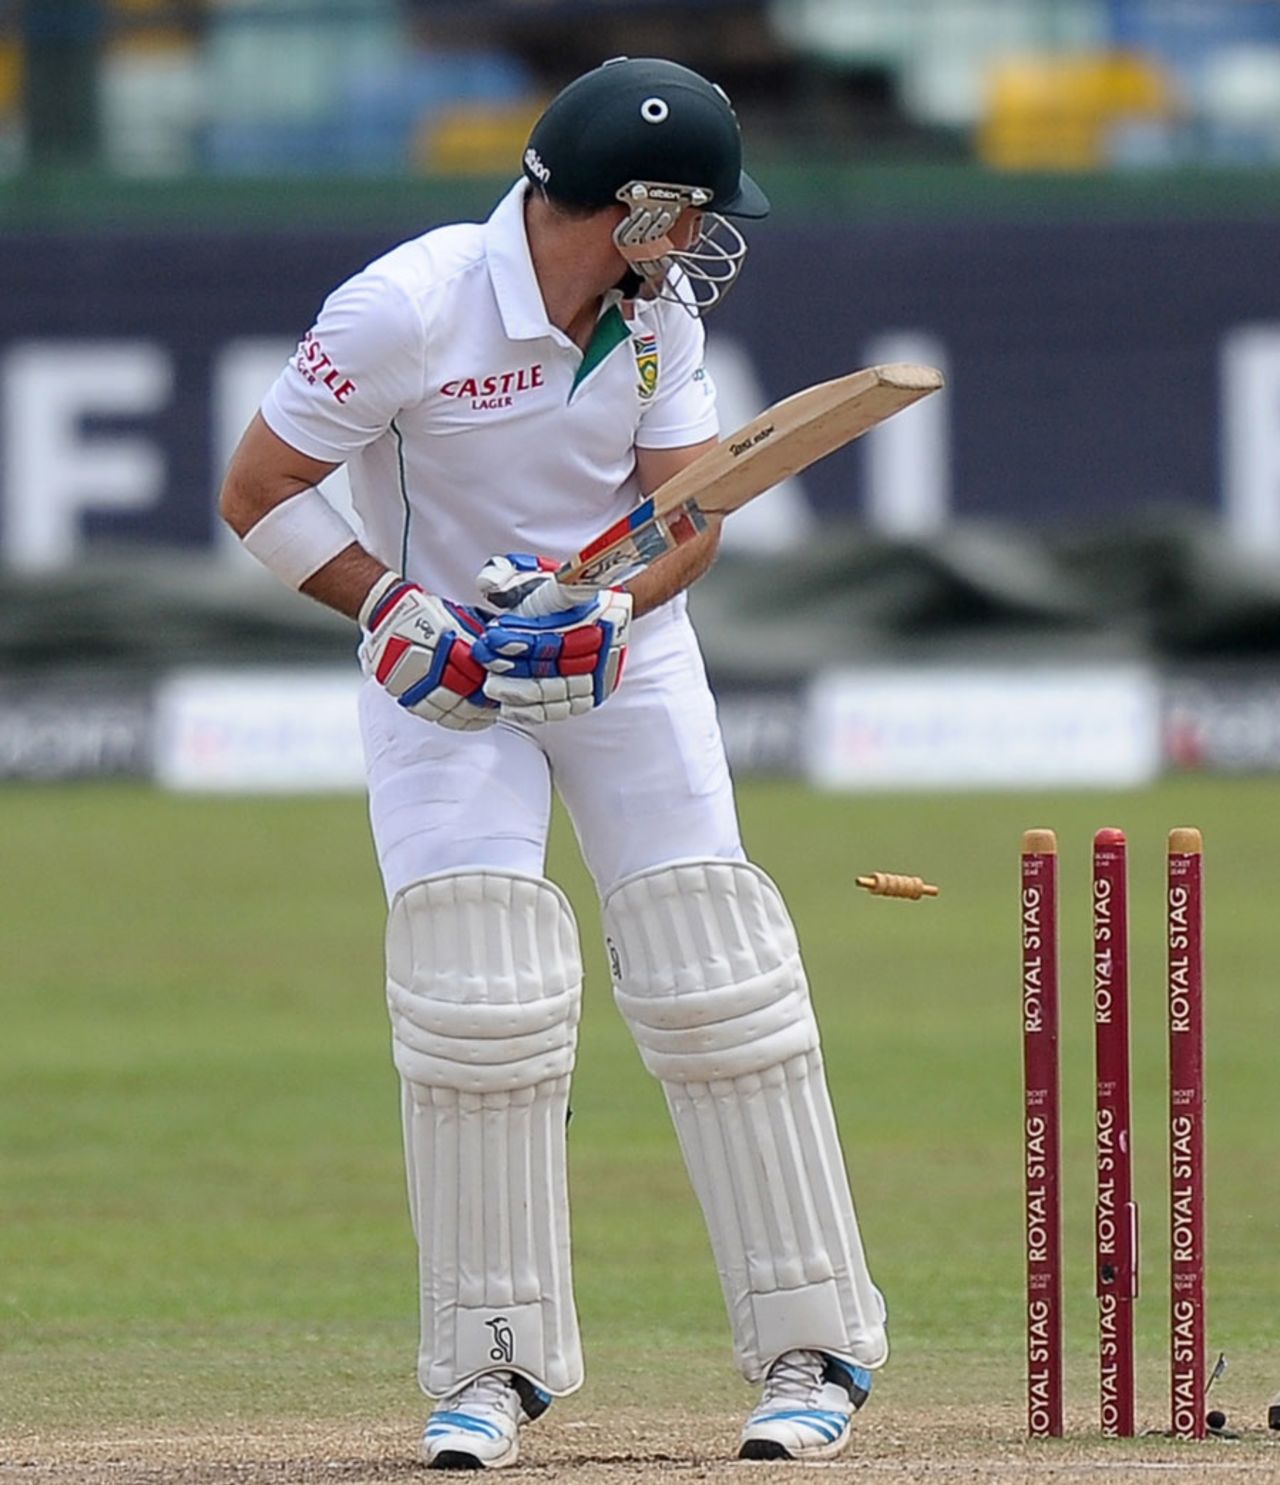 Dean Elgar was bowled by a ball that spun across to hit off stump, Sri Lanka v South Africa, 2nd Test, Colombo, 5th day, July 28, 2014